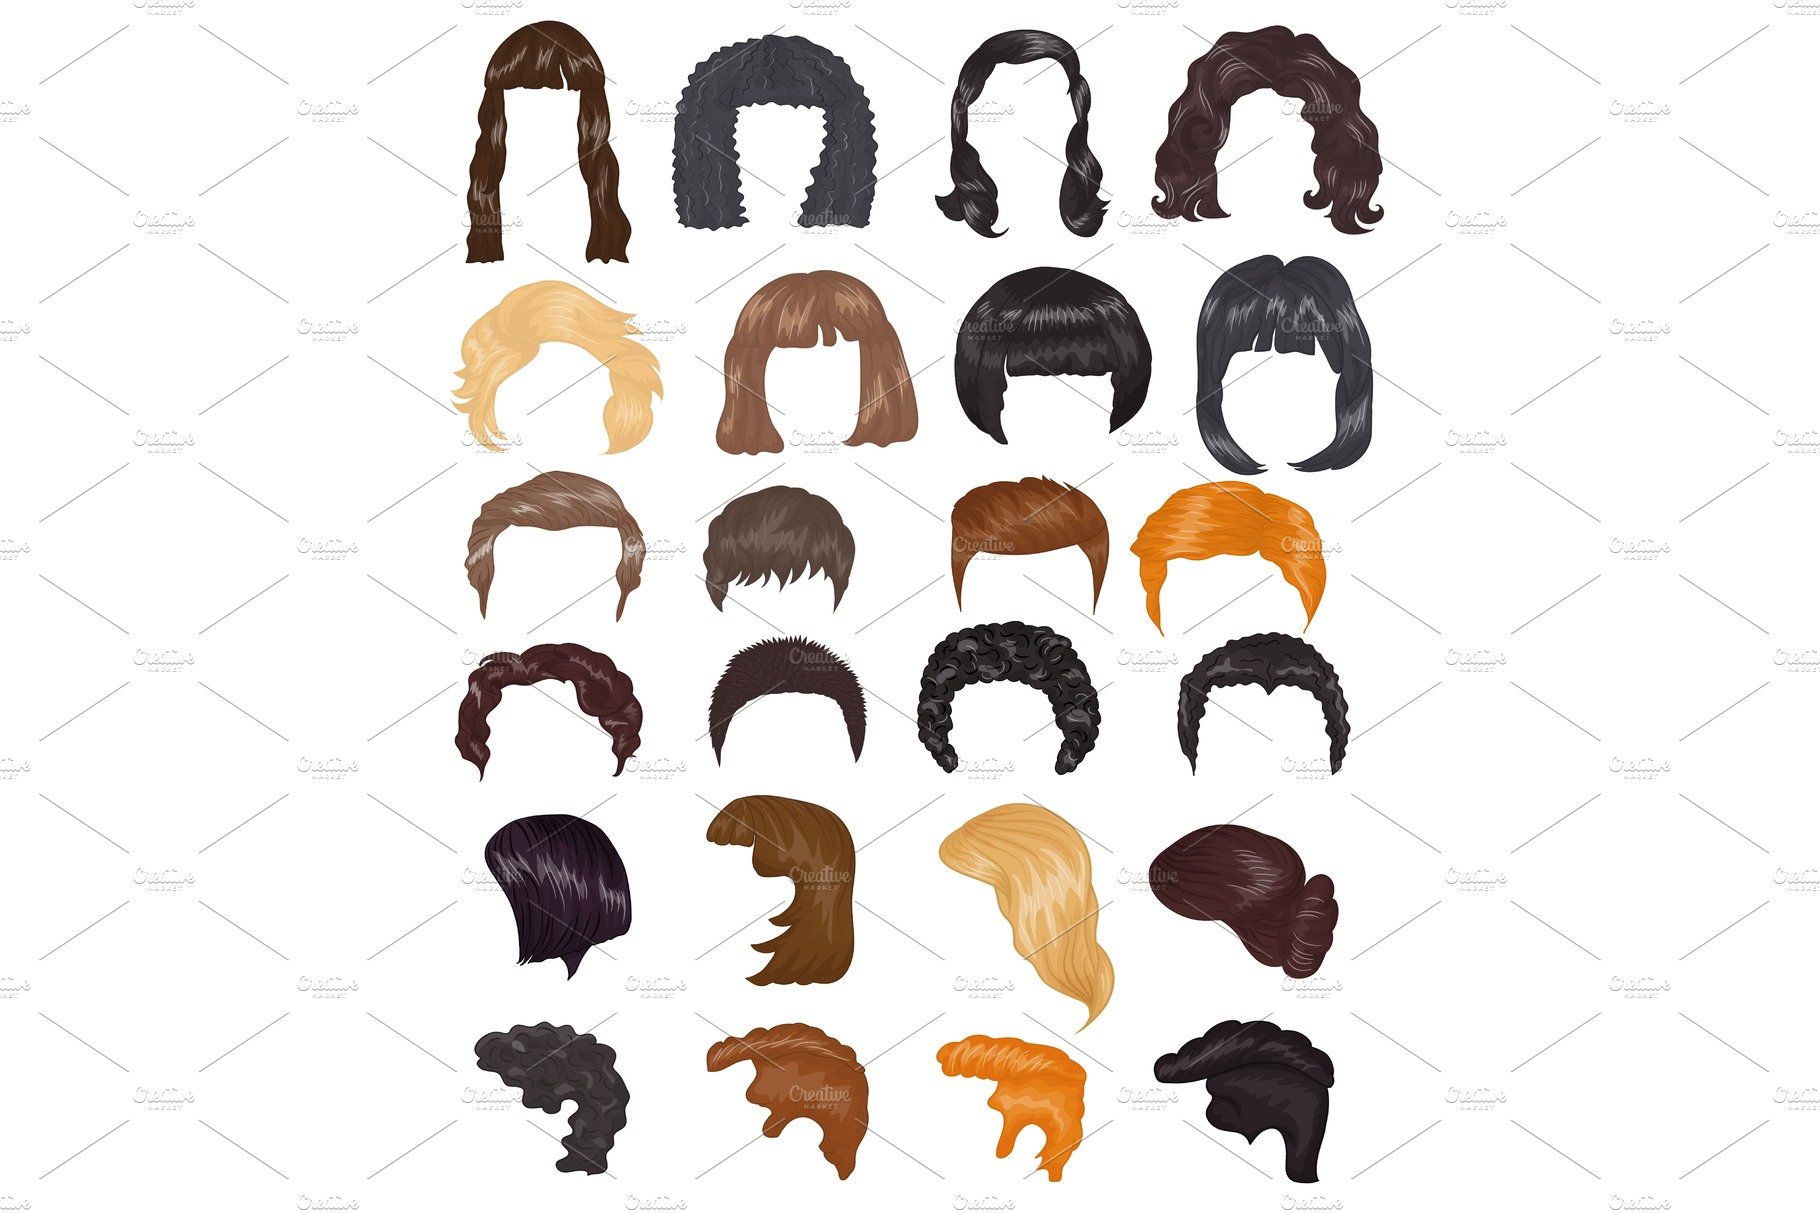 Hairstyle woman vector female cover image.